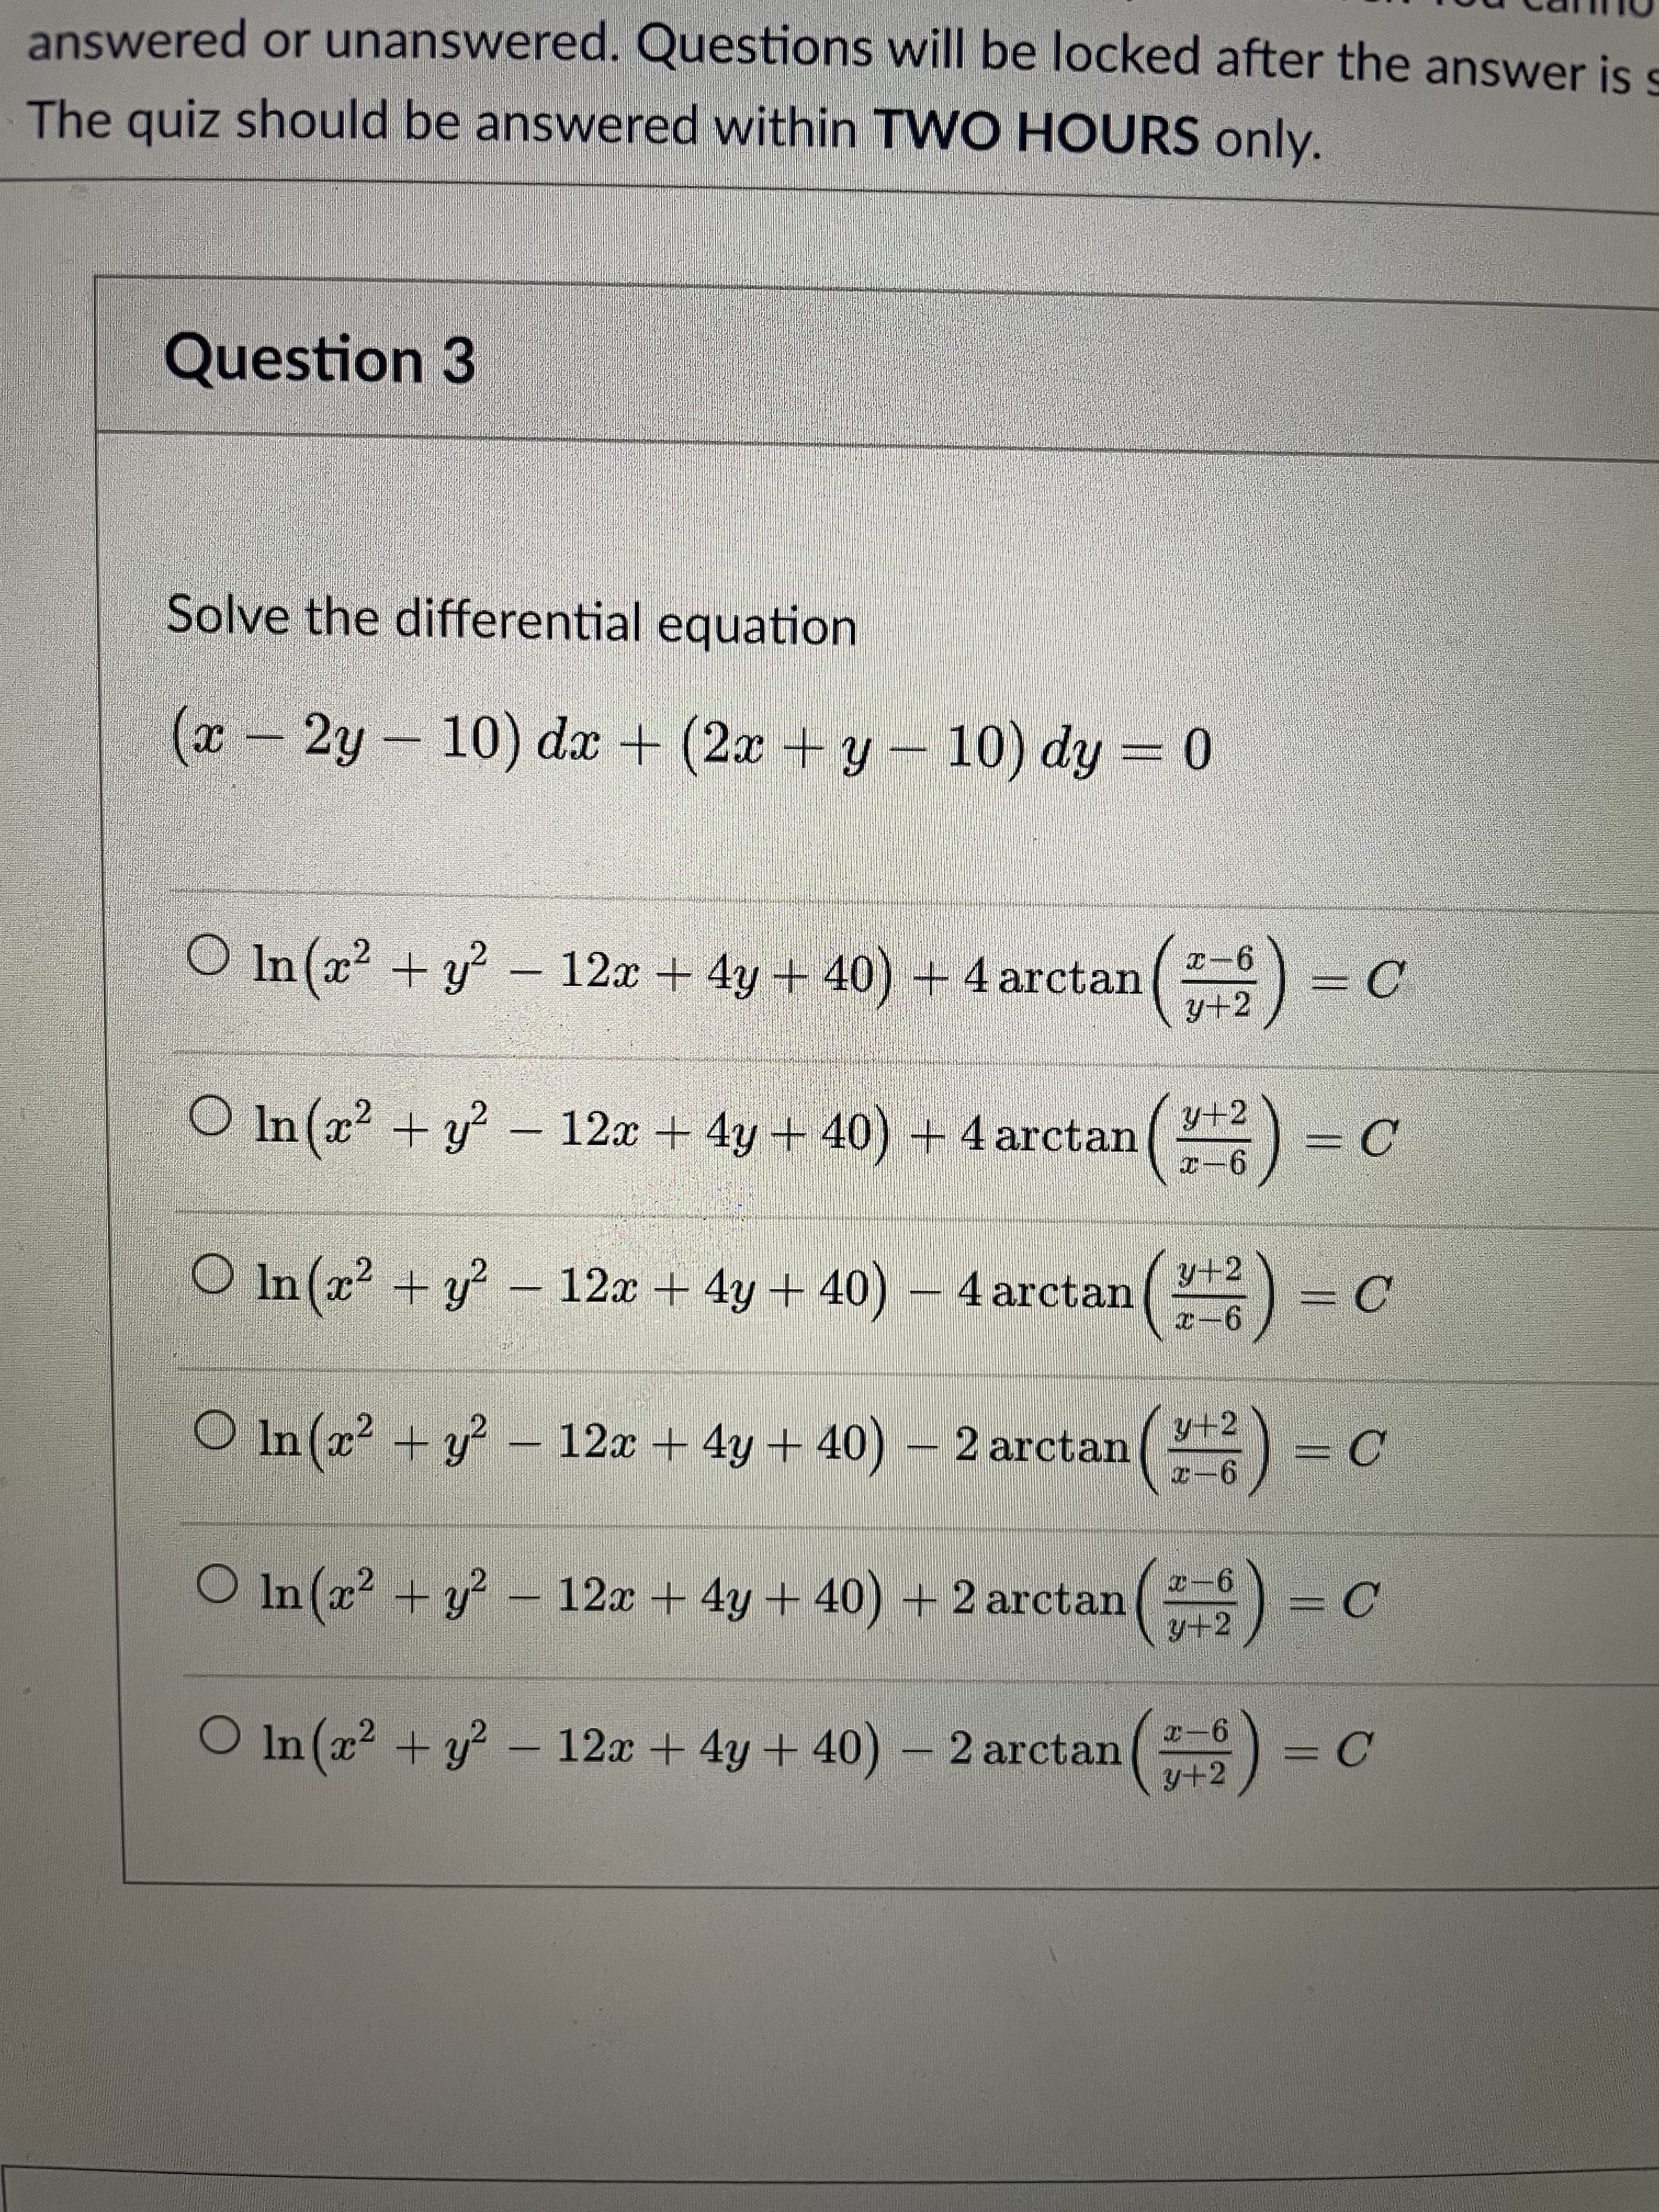 answered or unanswered. Questions will be locked after the answer is s
The quiz should be answered within TWO HOURS only.
Question 3
Solve the differential equation
-2y- 10) dx + (2x +y- 10) dy = 0
O In (x2 + y? – 12x + 4y + 40) + 4 arctan
9-x
= C
y+2
O In (x2 + y? – 12x + 4y + 40) + 4 arctan
Y+2
— С
9-x
O In (x? + y? – 12x + 4y + 40) – 4 arctan
y+2
= C
9-7
O In (x? + y? – 12x + 4y + 40) 2 arctan
= C
O In (x + y – (
12x + 4y+ 40) + 2 arctan
9-2
= C
y+2
O In (x2 + y? – 12x + 4y + 40) – 2 arctan
9-
= C
y+2
